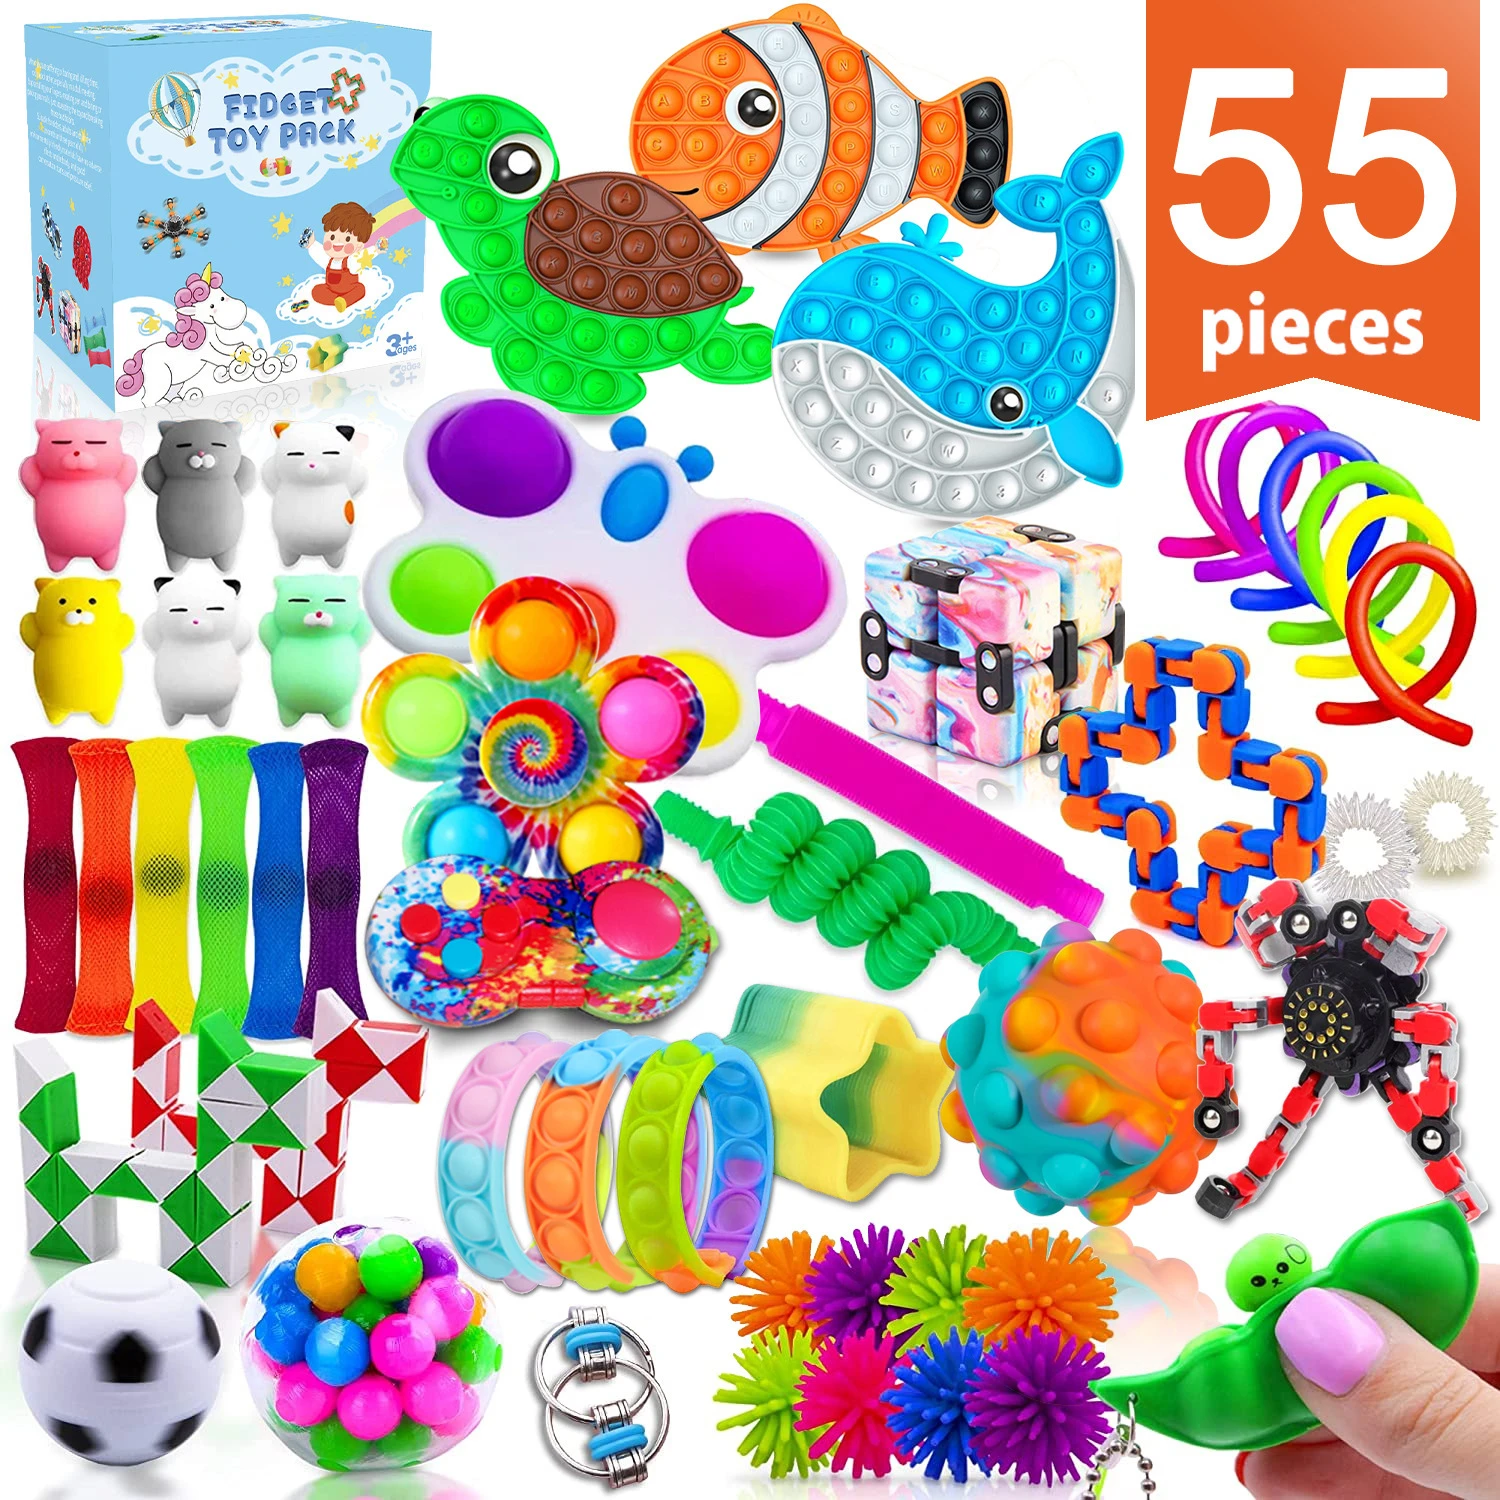 squishy mesh ball Fidget Toys Pack Set 100 Pack Anti stress Easter Advent Calendar Antistress Relief Figet Toy Pack Box Kids Antiestres Gift squeeze ball maker